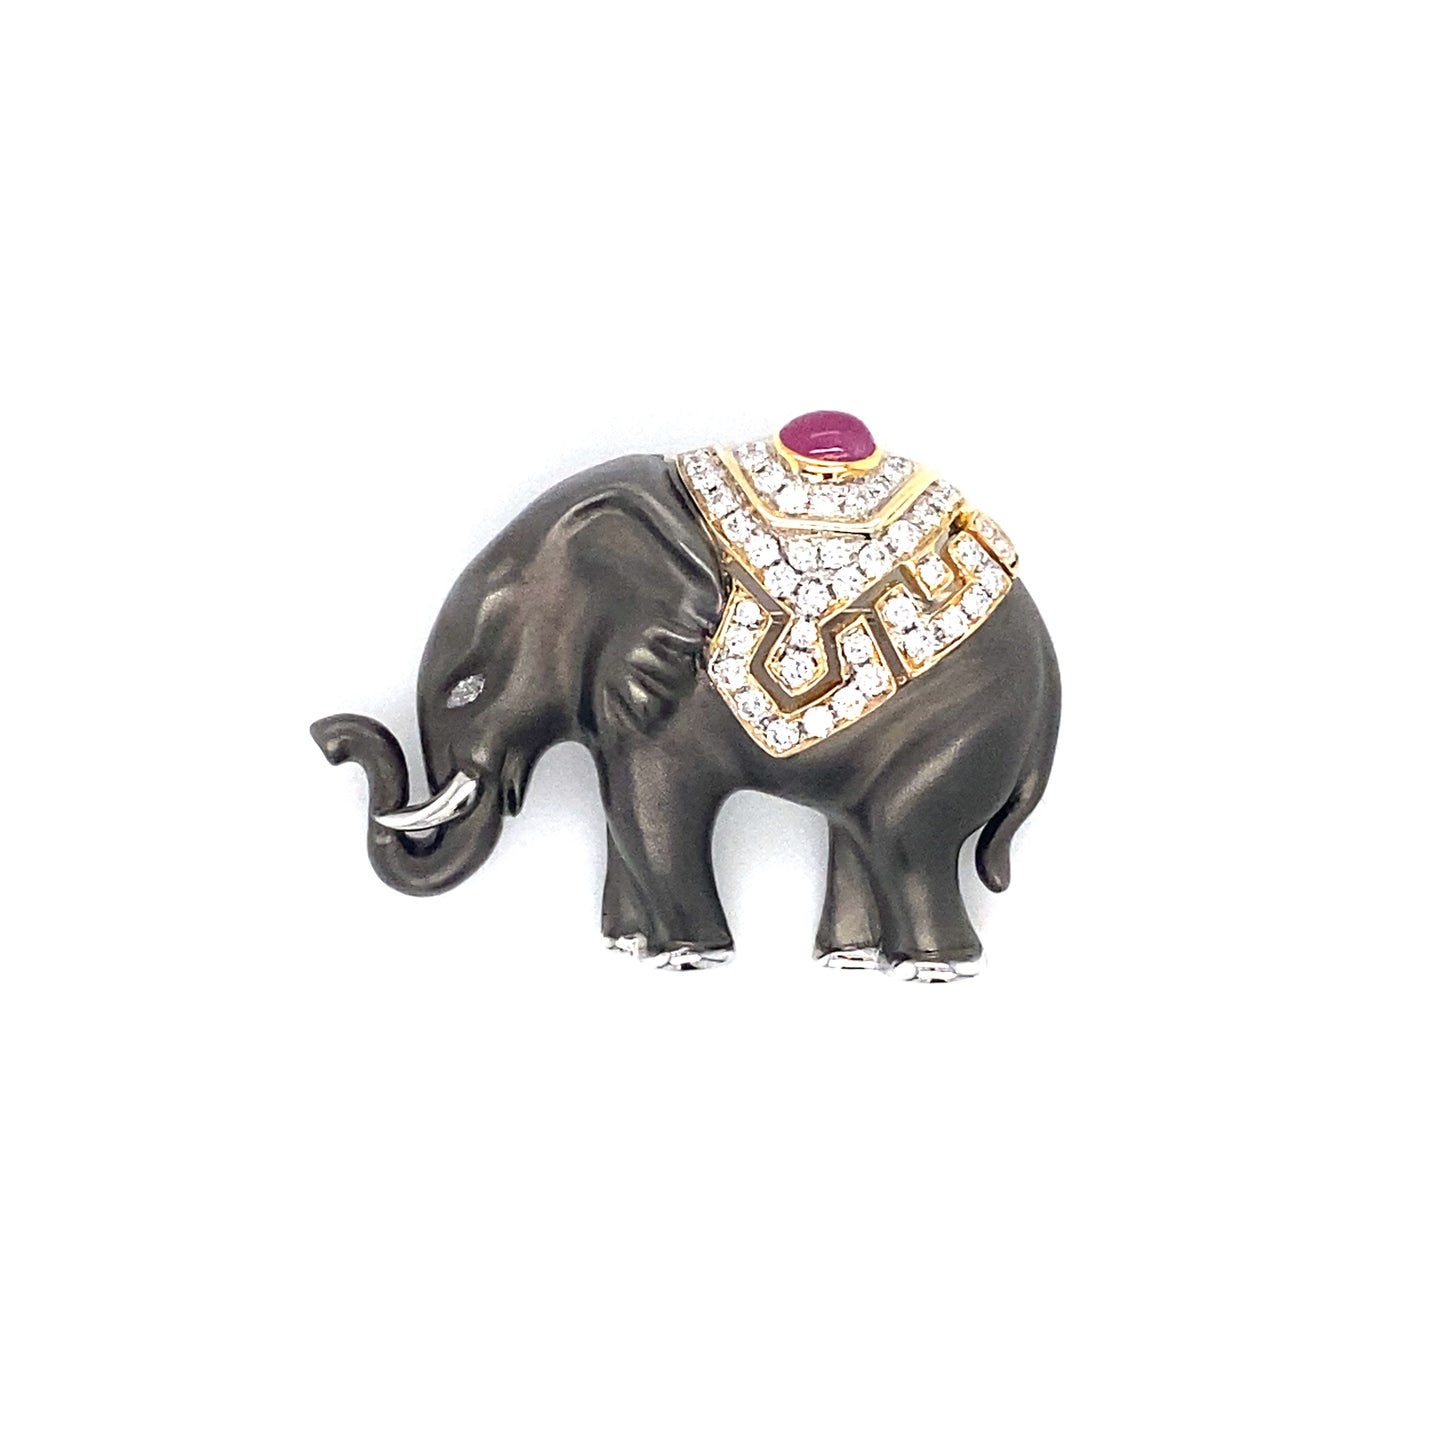 Circa 2000s Ruby and Diamond Elephant Brooch in 18K White Gold